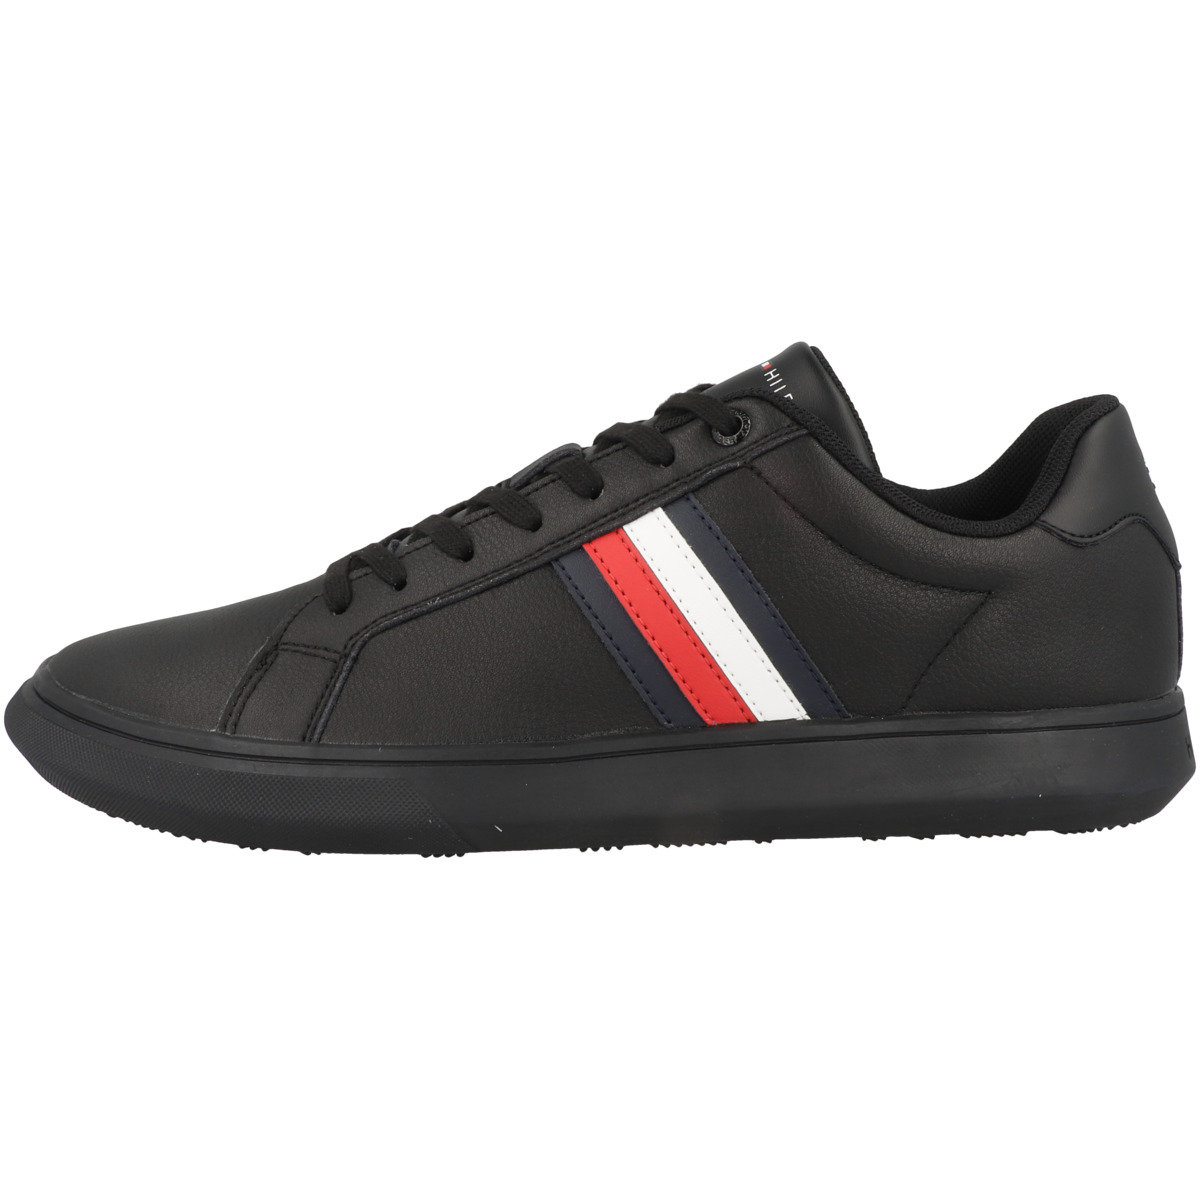 Tommy Hilfiger Corporate Cup Leather Stripes Sneaker low